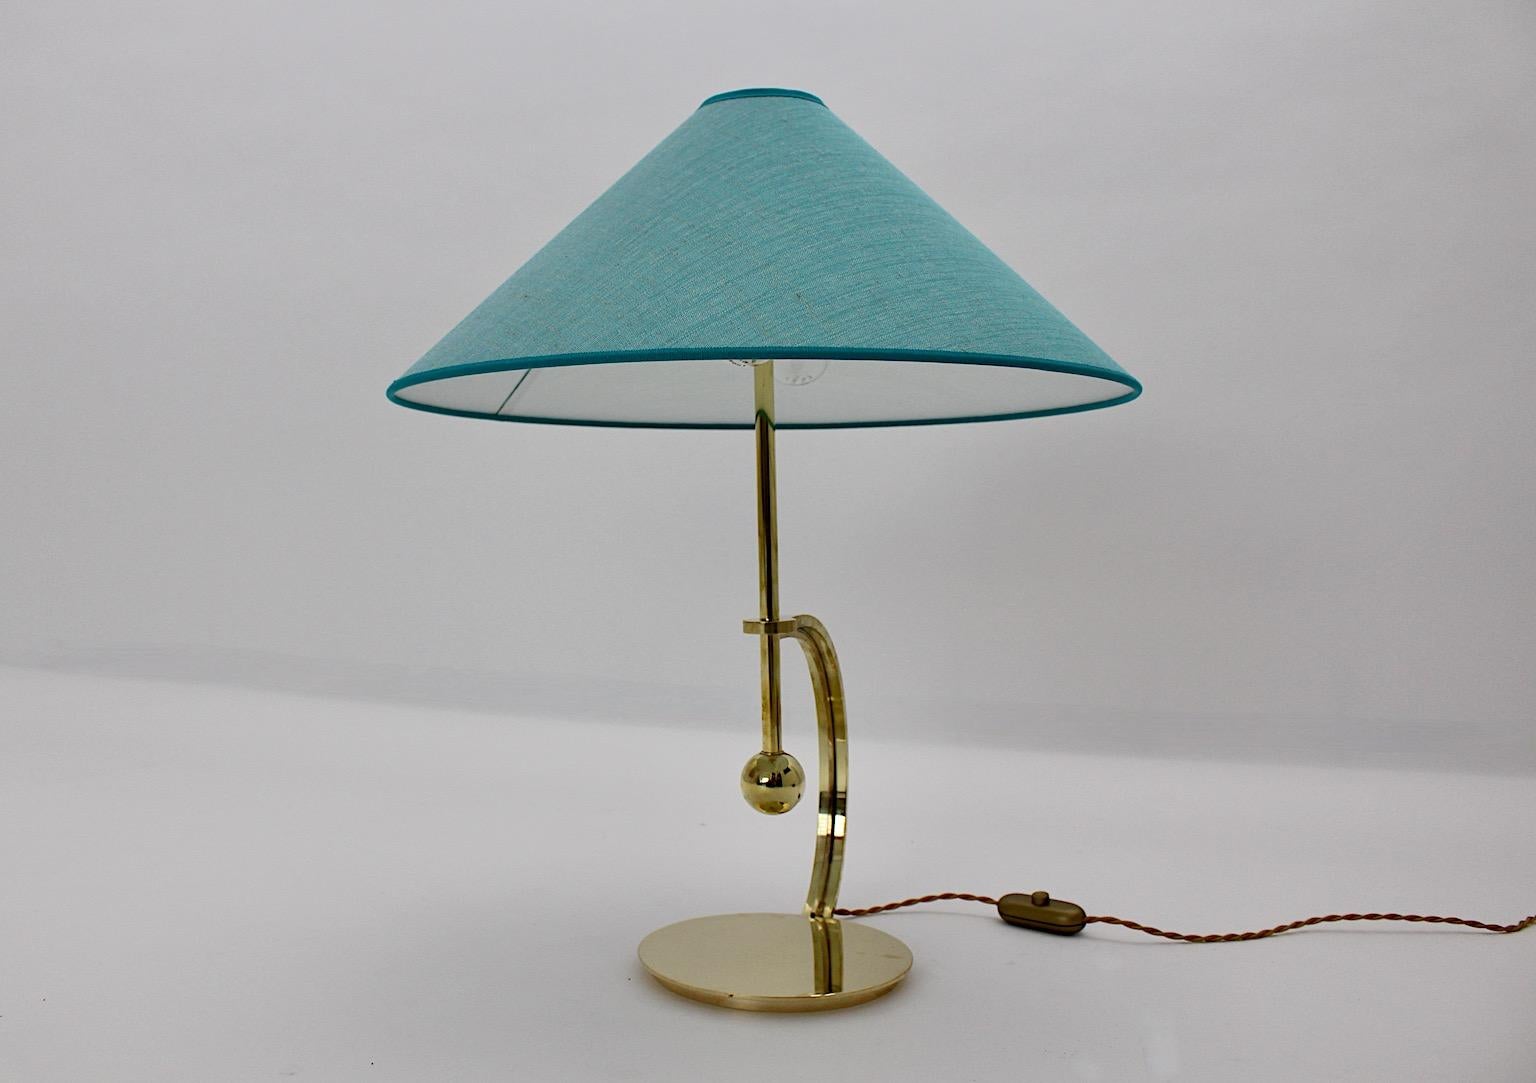 Art Deco Brass Vintage Table Lamp Blue Teal Textile Shade Vienna C 1925 For Sale 7